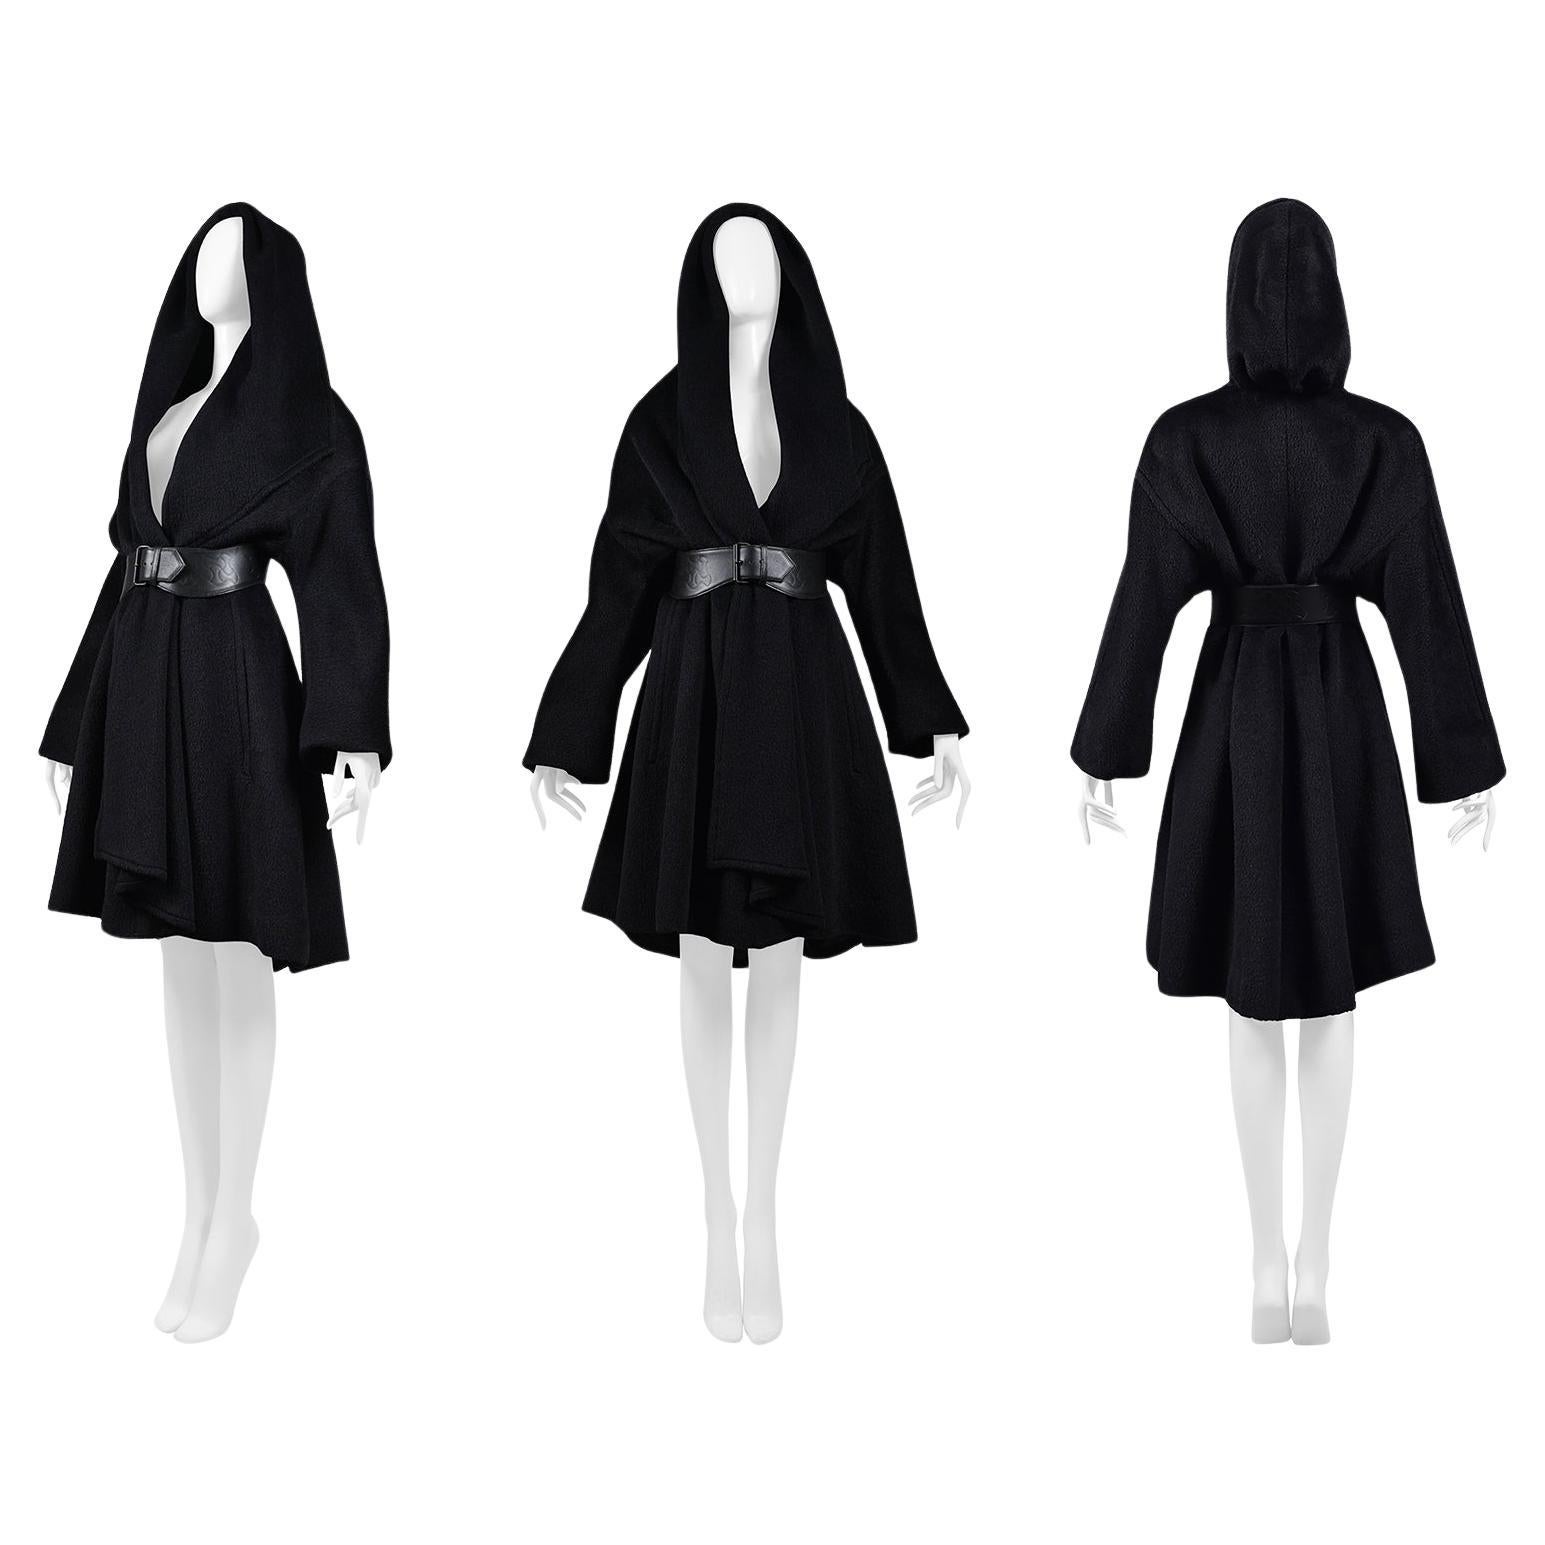 Thierry Mugler Black Alpaca Hooded Cape Coat In Good Condition For Sale In Los Angeles, CA